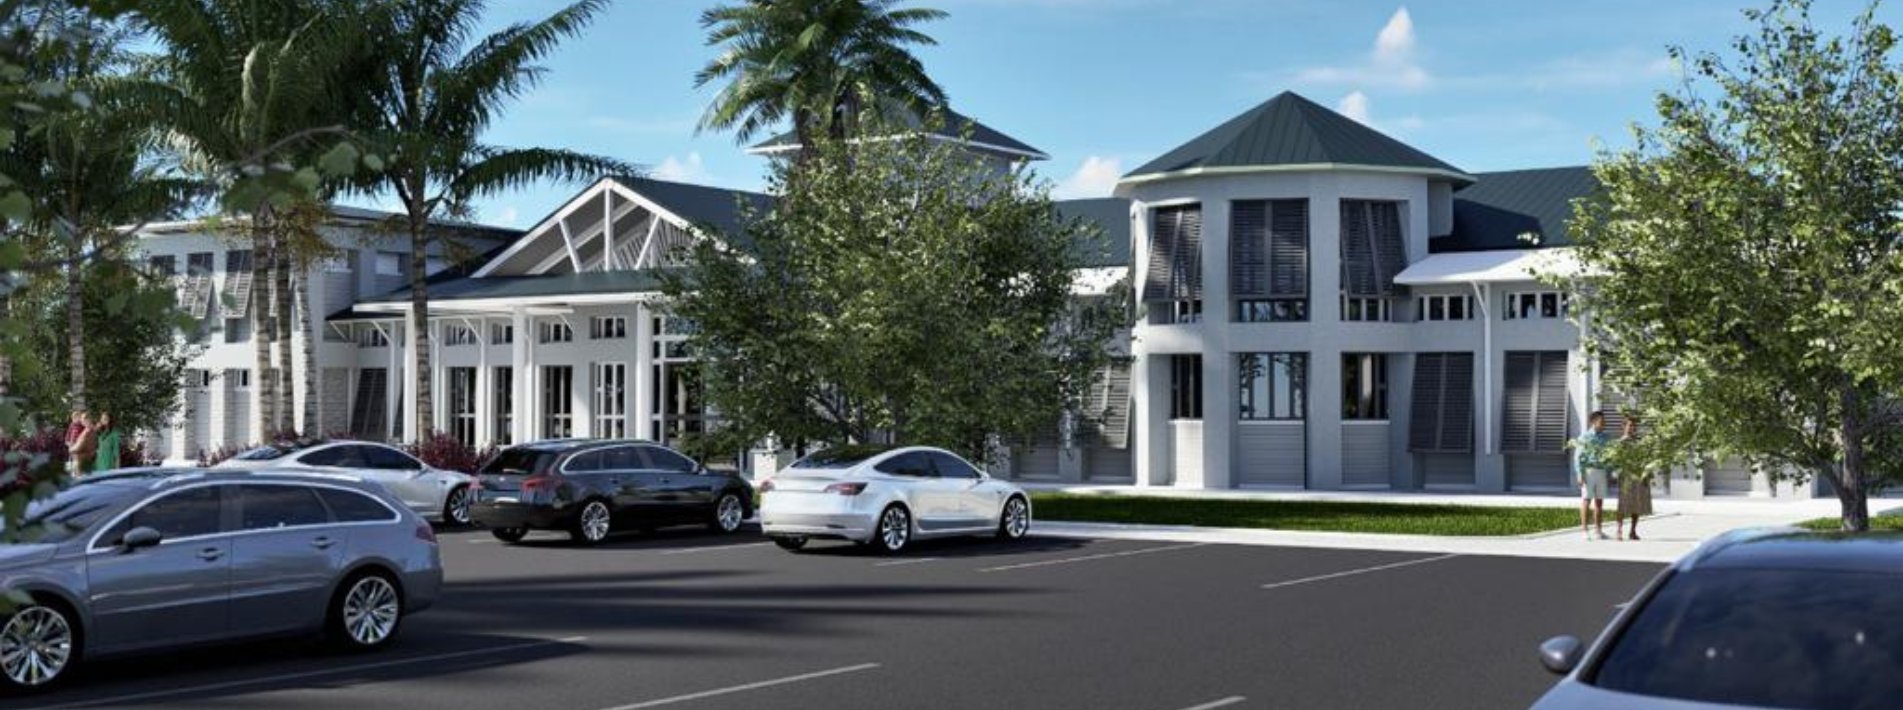 Windsor Cay Resort Investment Homes